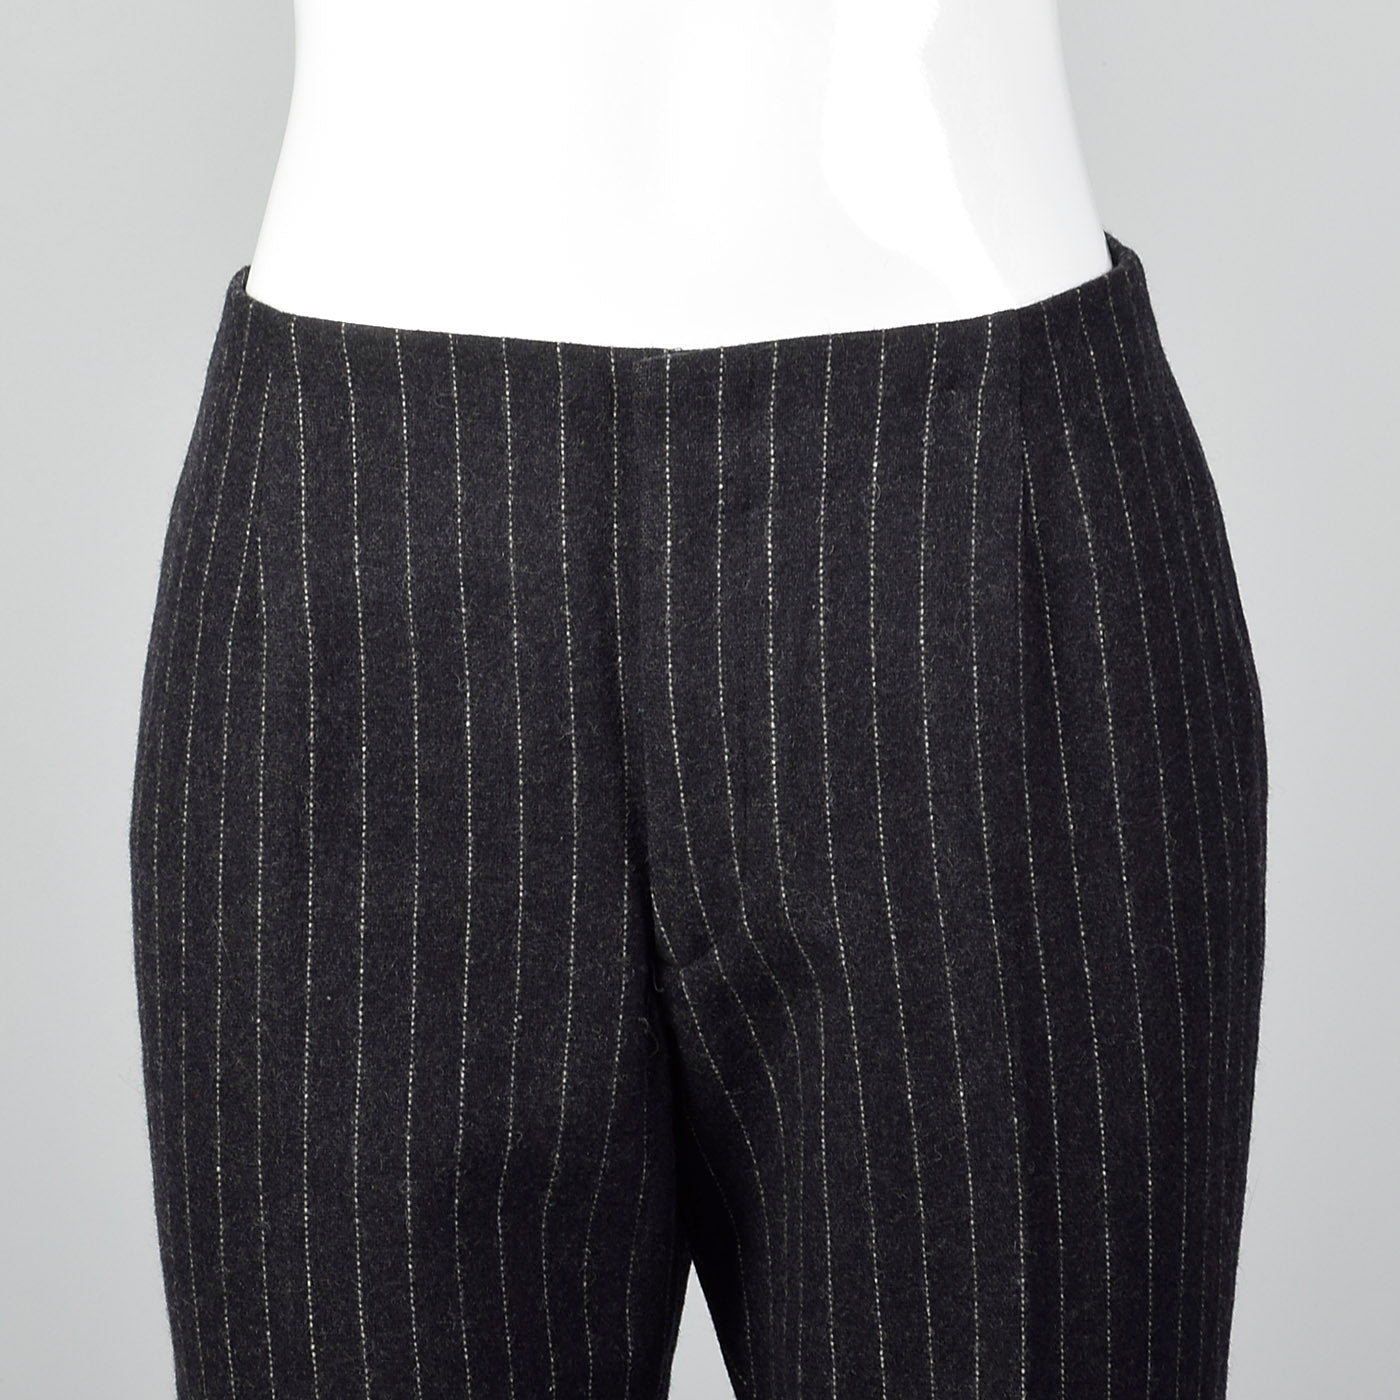 1960s Gray Wool Cigarette Pants with White Pinstripe